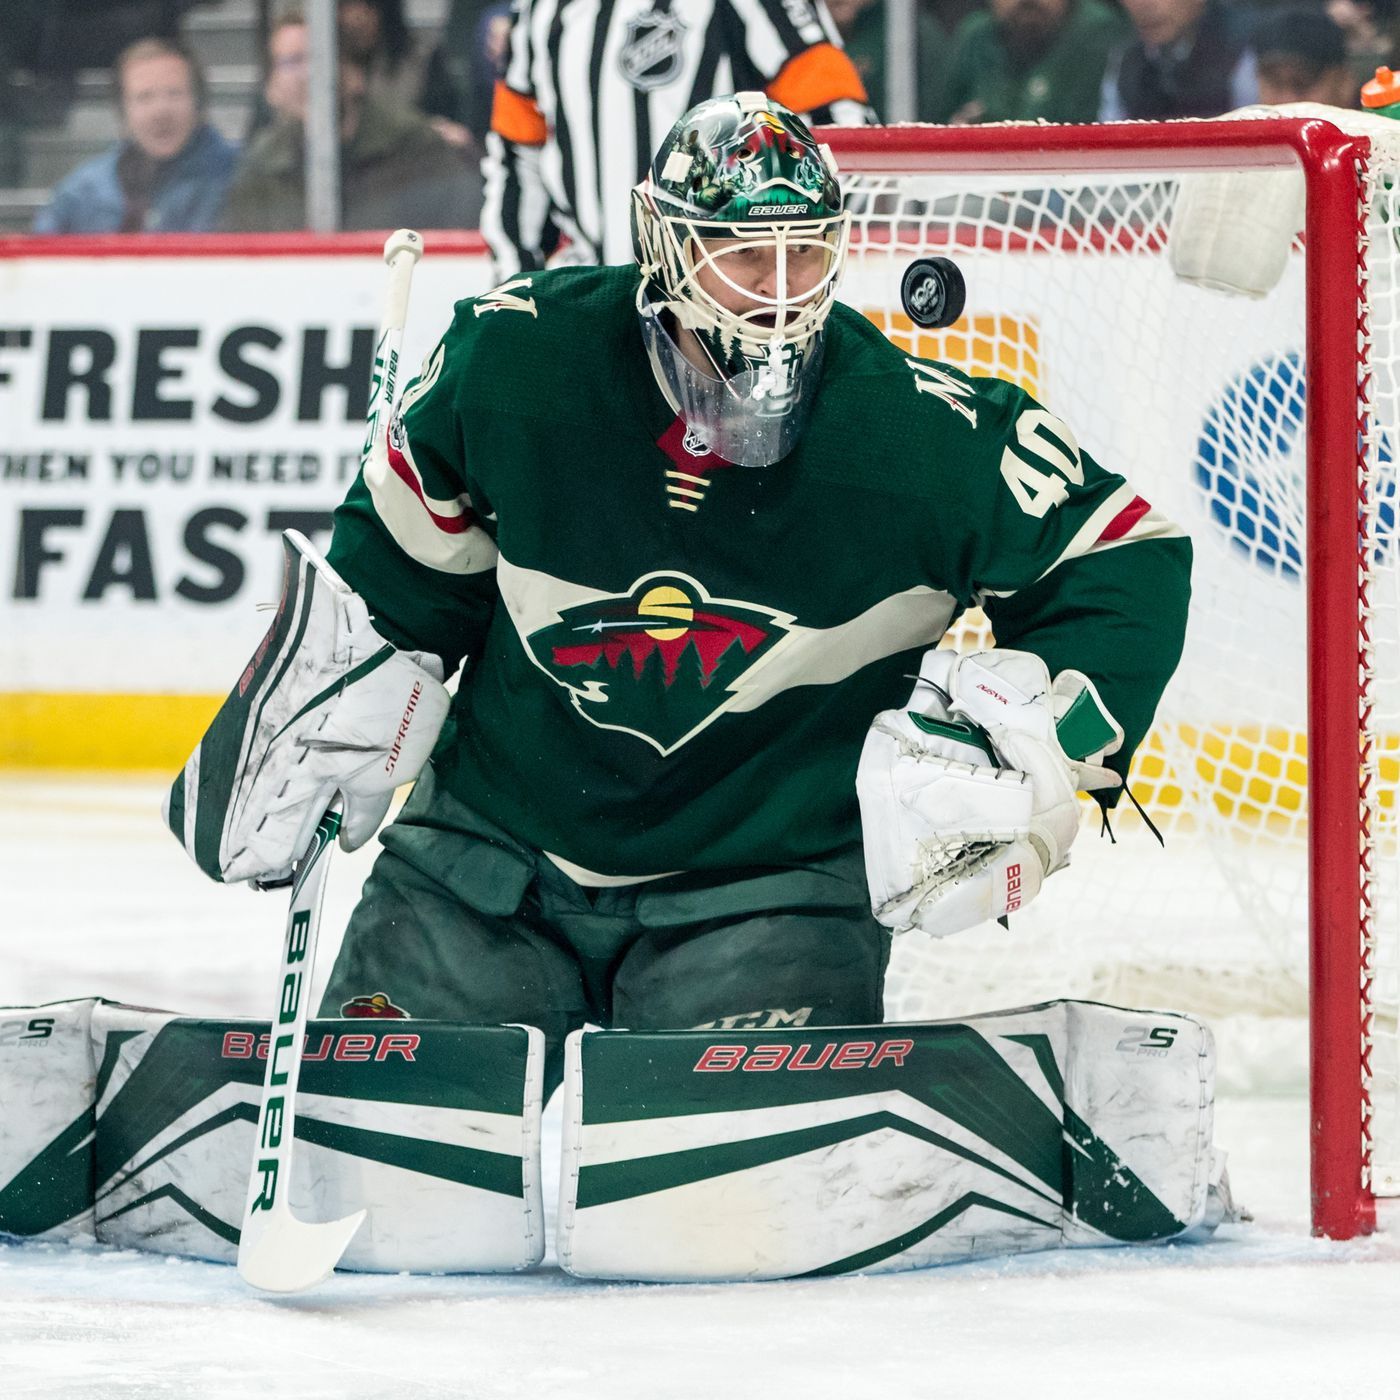 Devan Dubnyk leaves game after 1st period against Flames